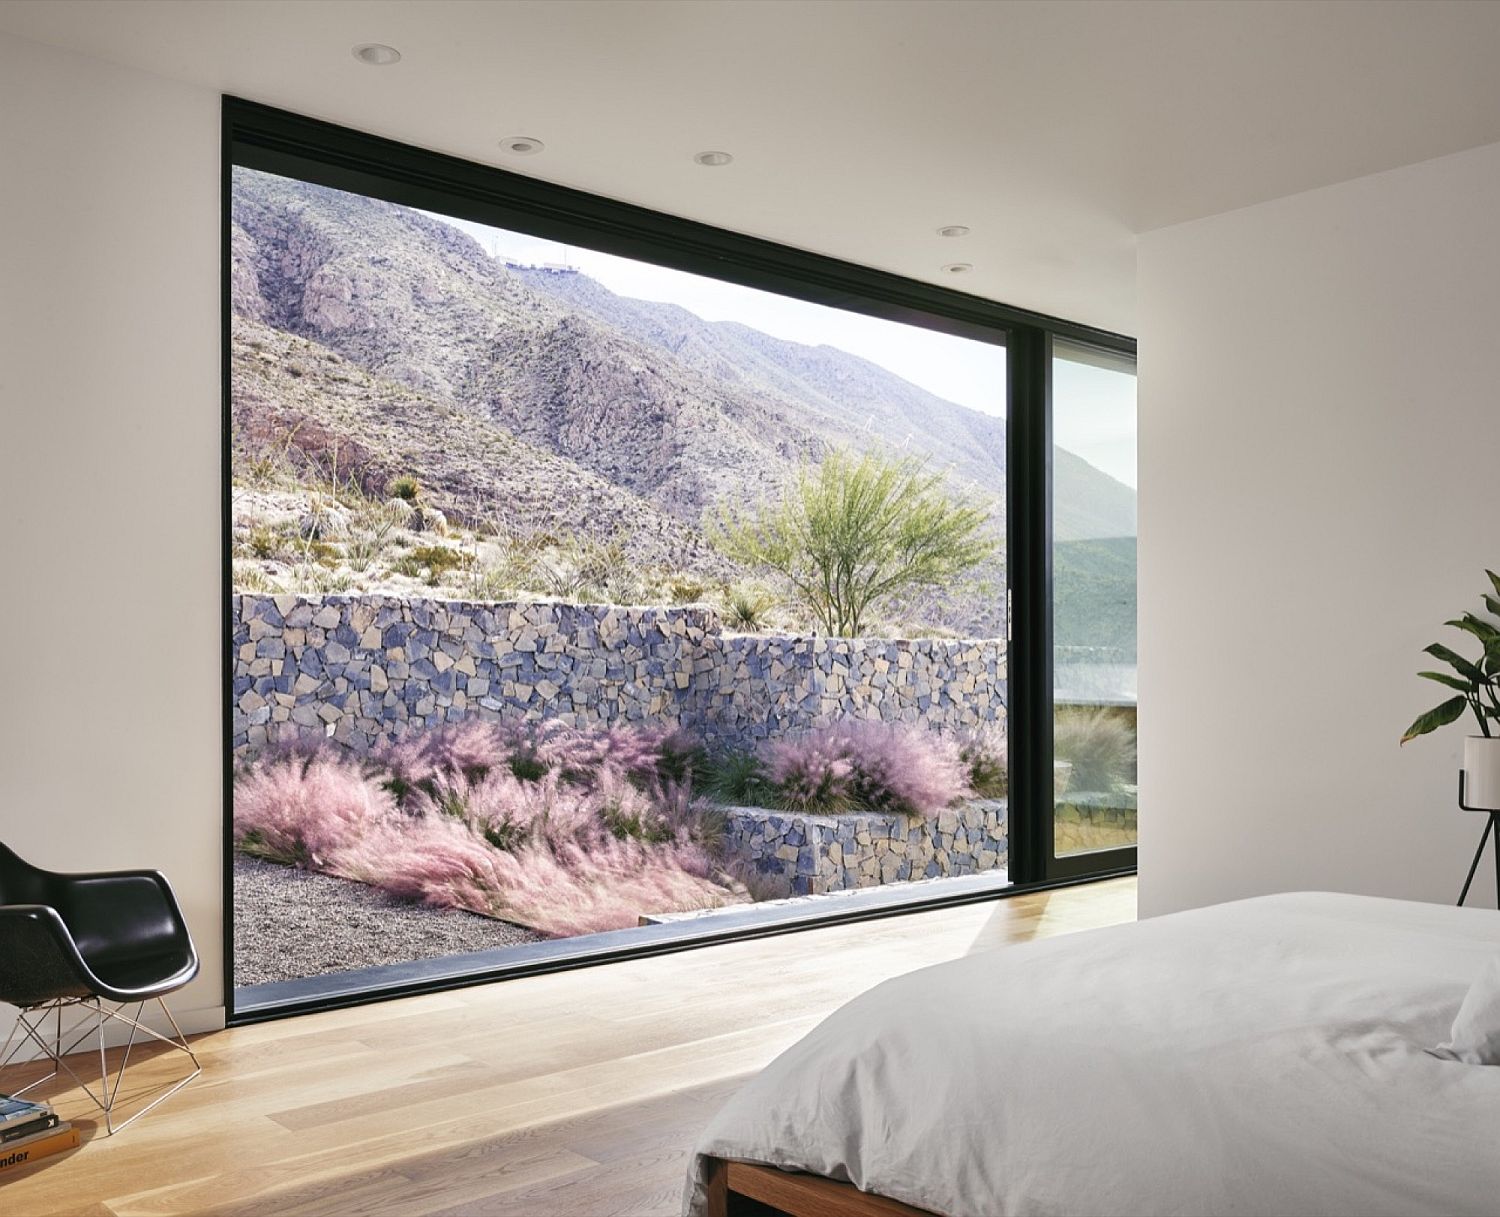 Floor-to-ceiling window connects the bedroom with the rugged mountain landscape